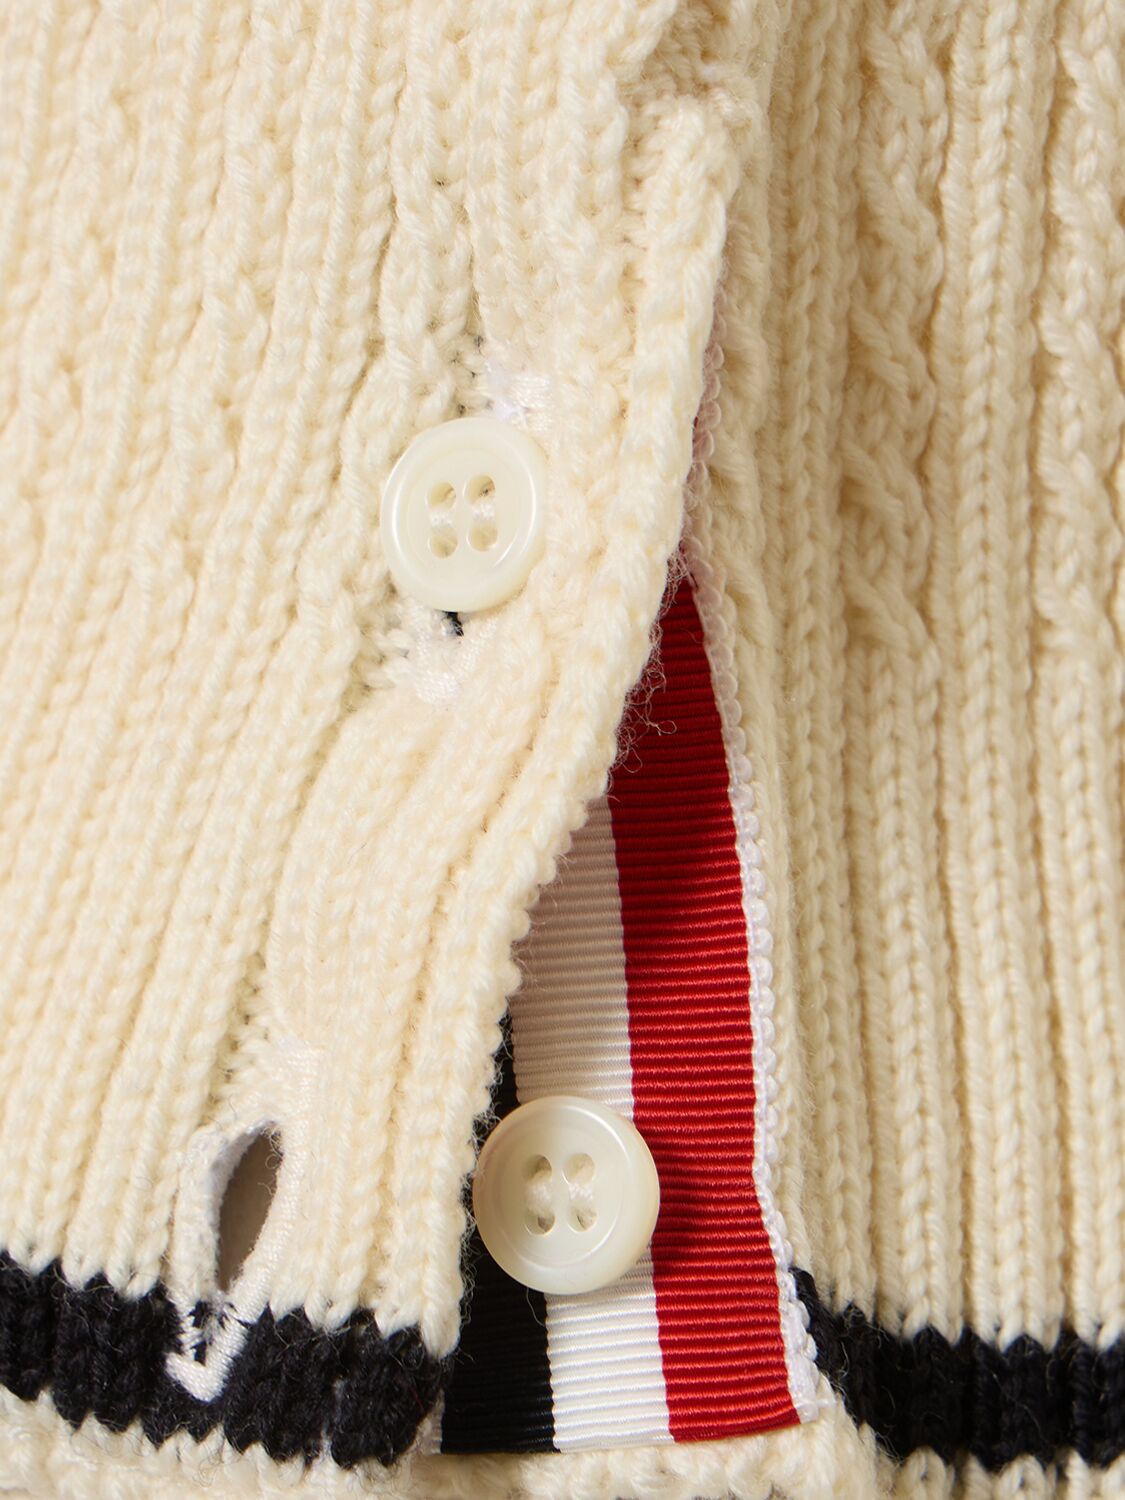 Shop Thom Browne Baby Cable Cropped V-neck Cardigan Vest In Ivory